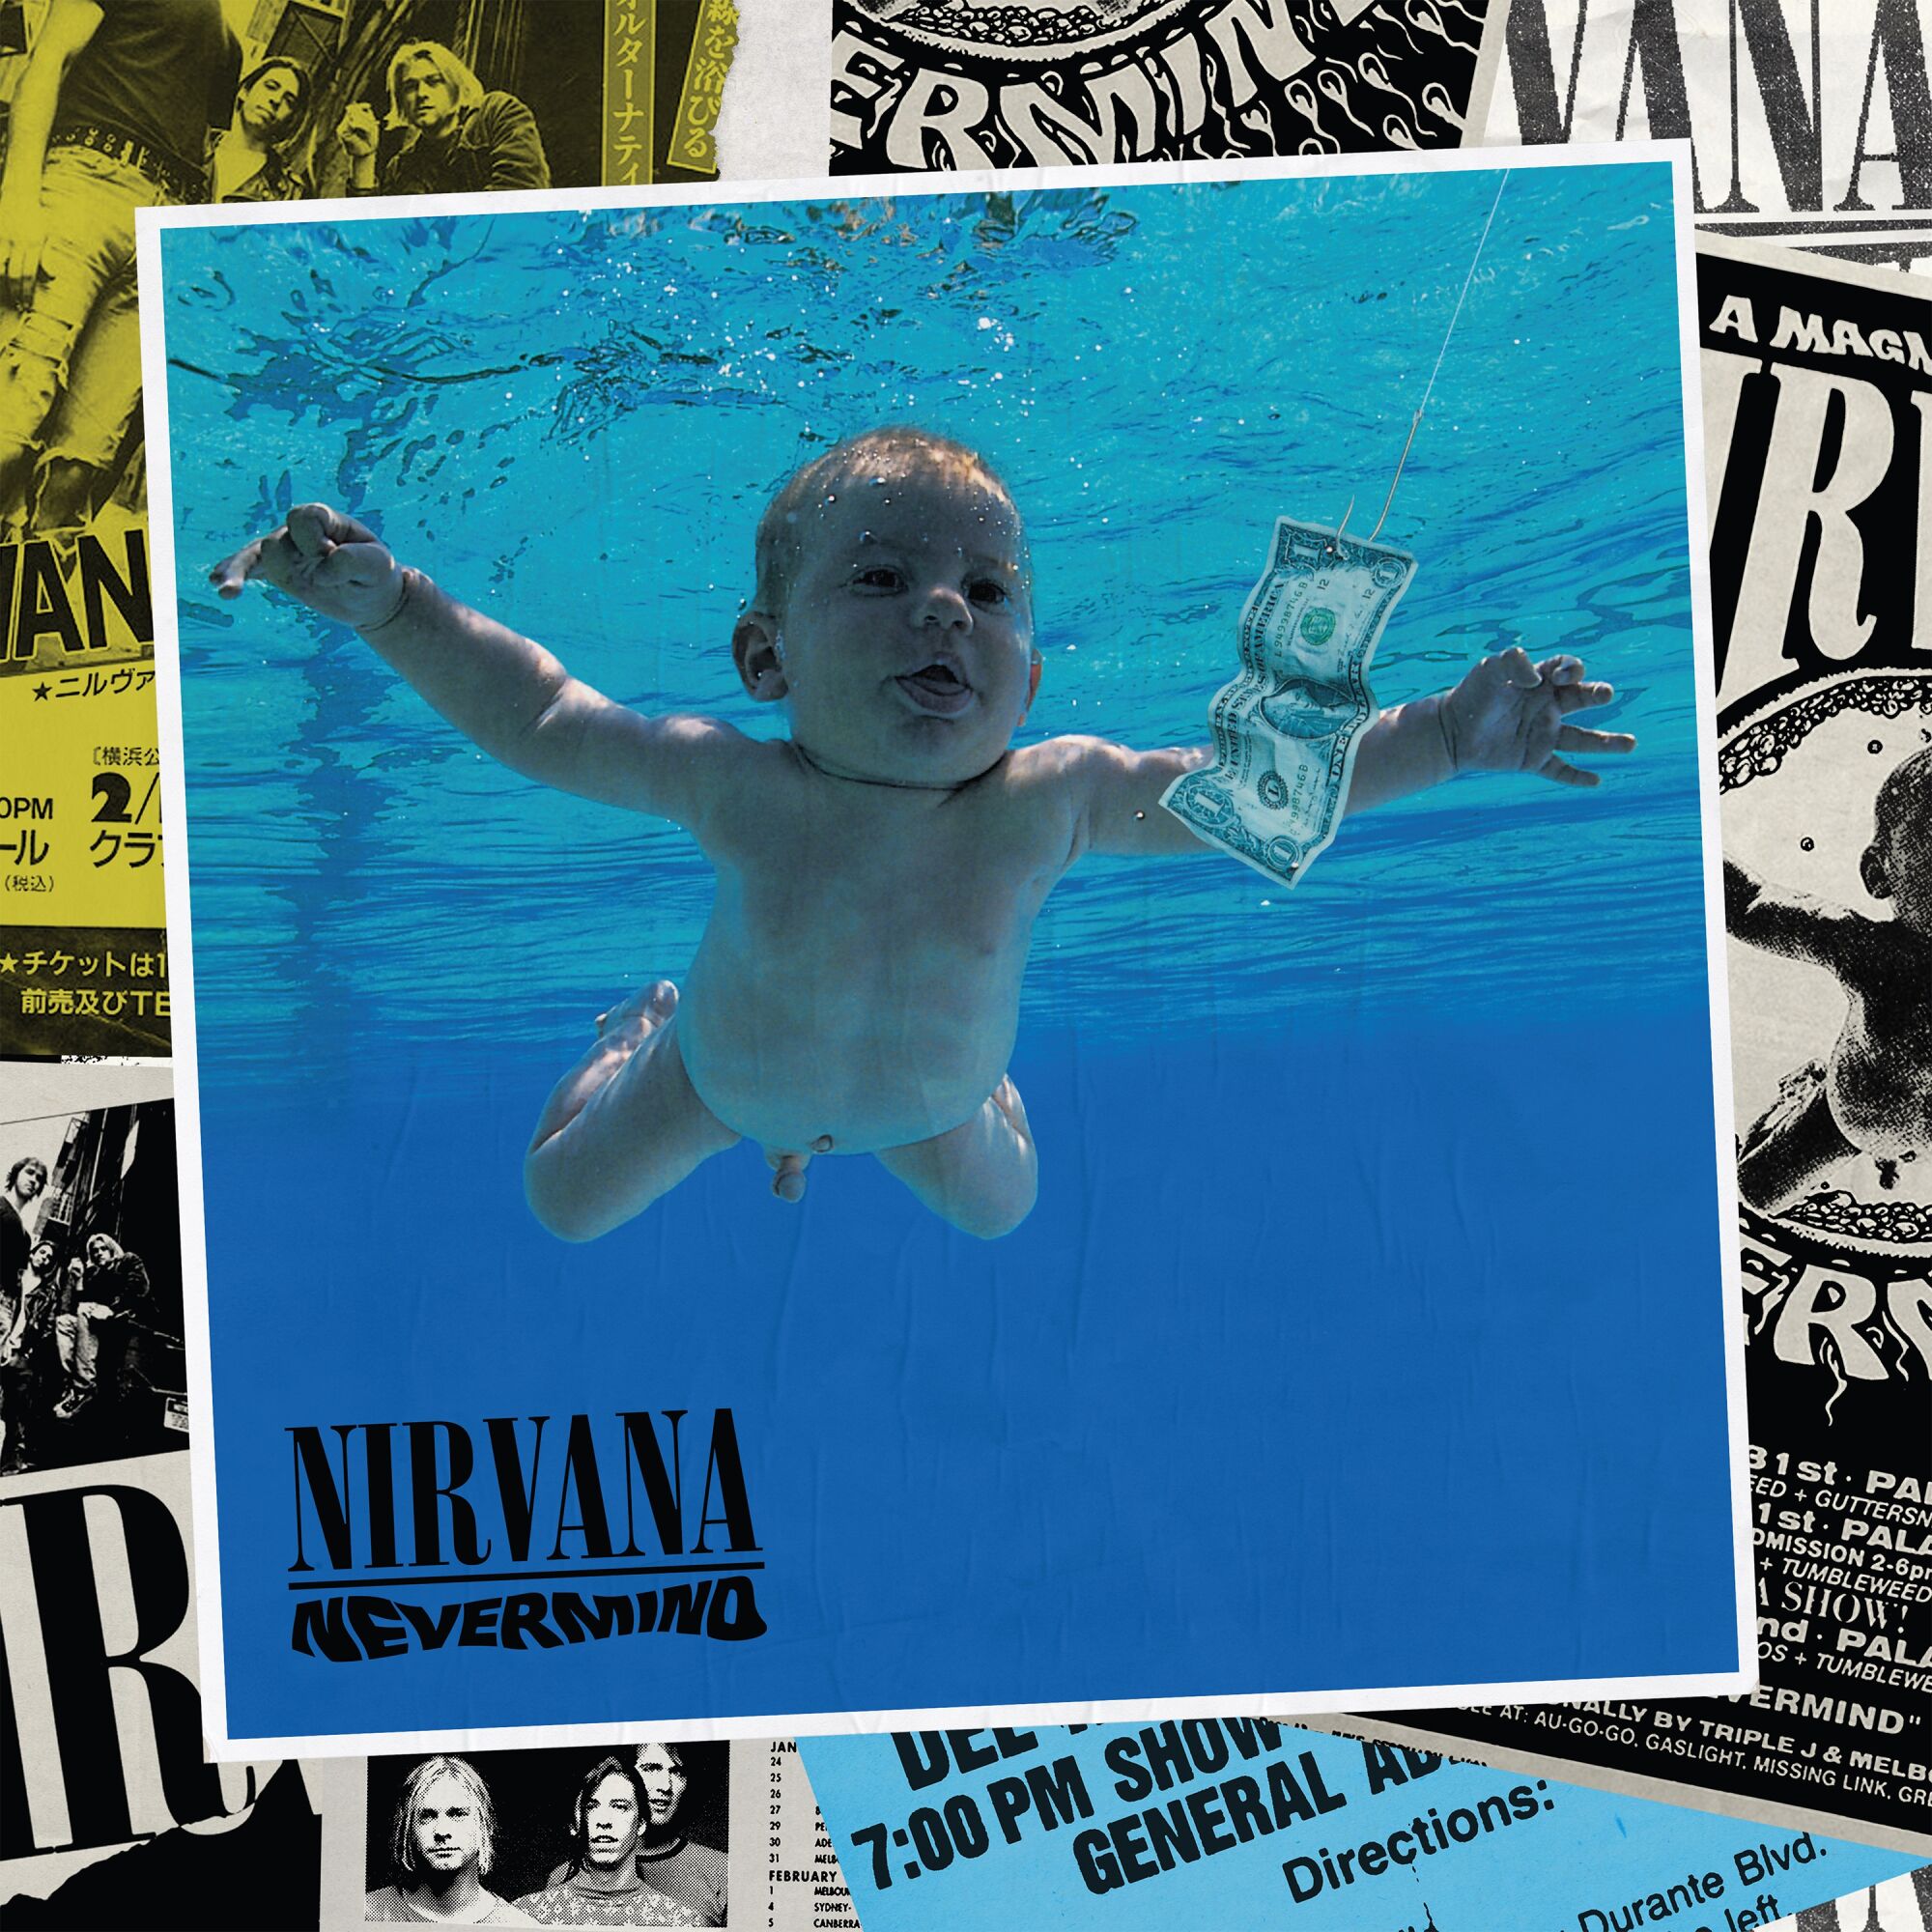 Nirvana's "Nevermind" album cover showing a baby floating in water with a one-dollar bill